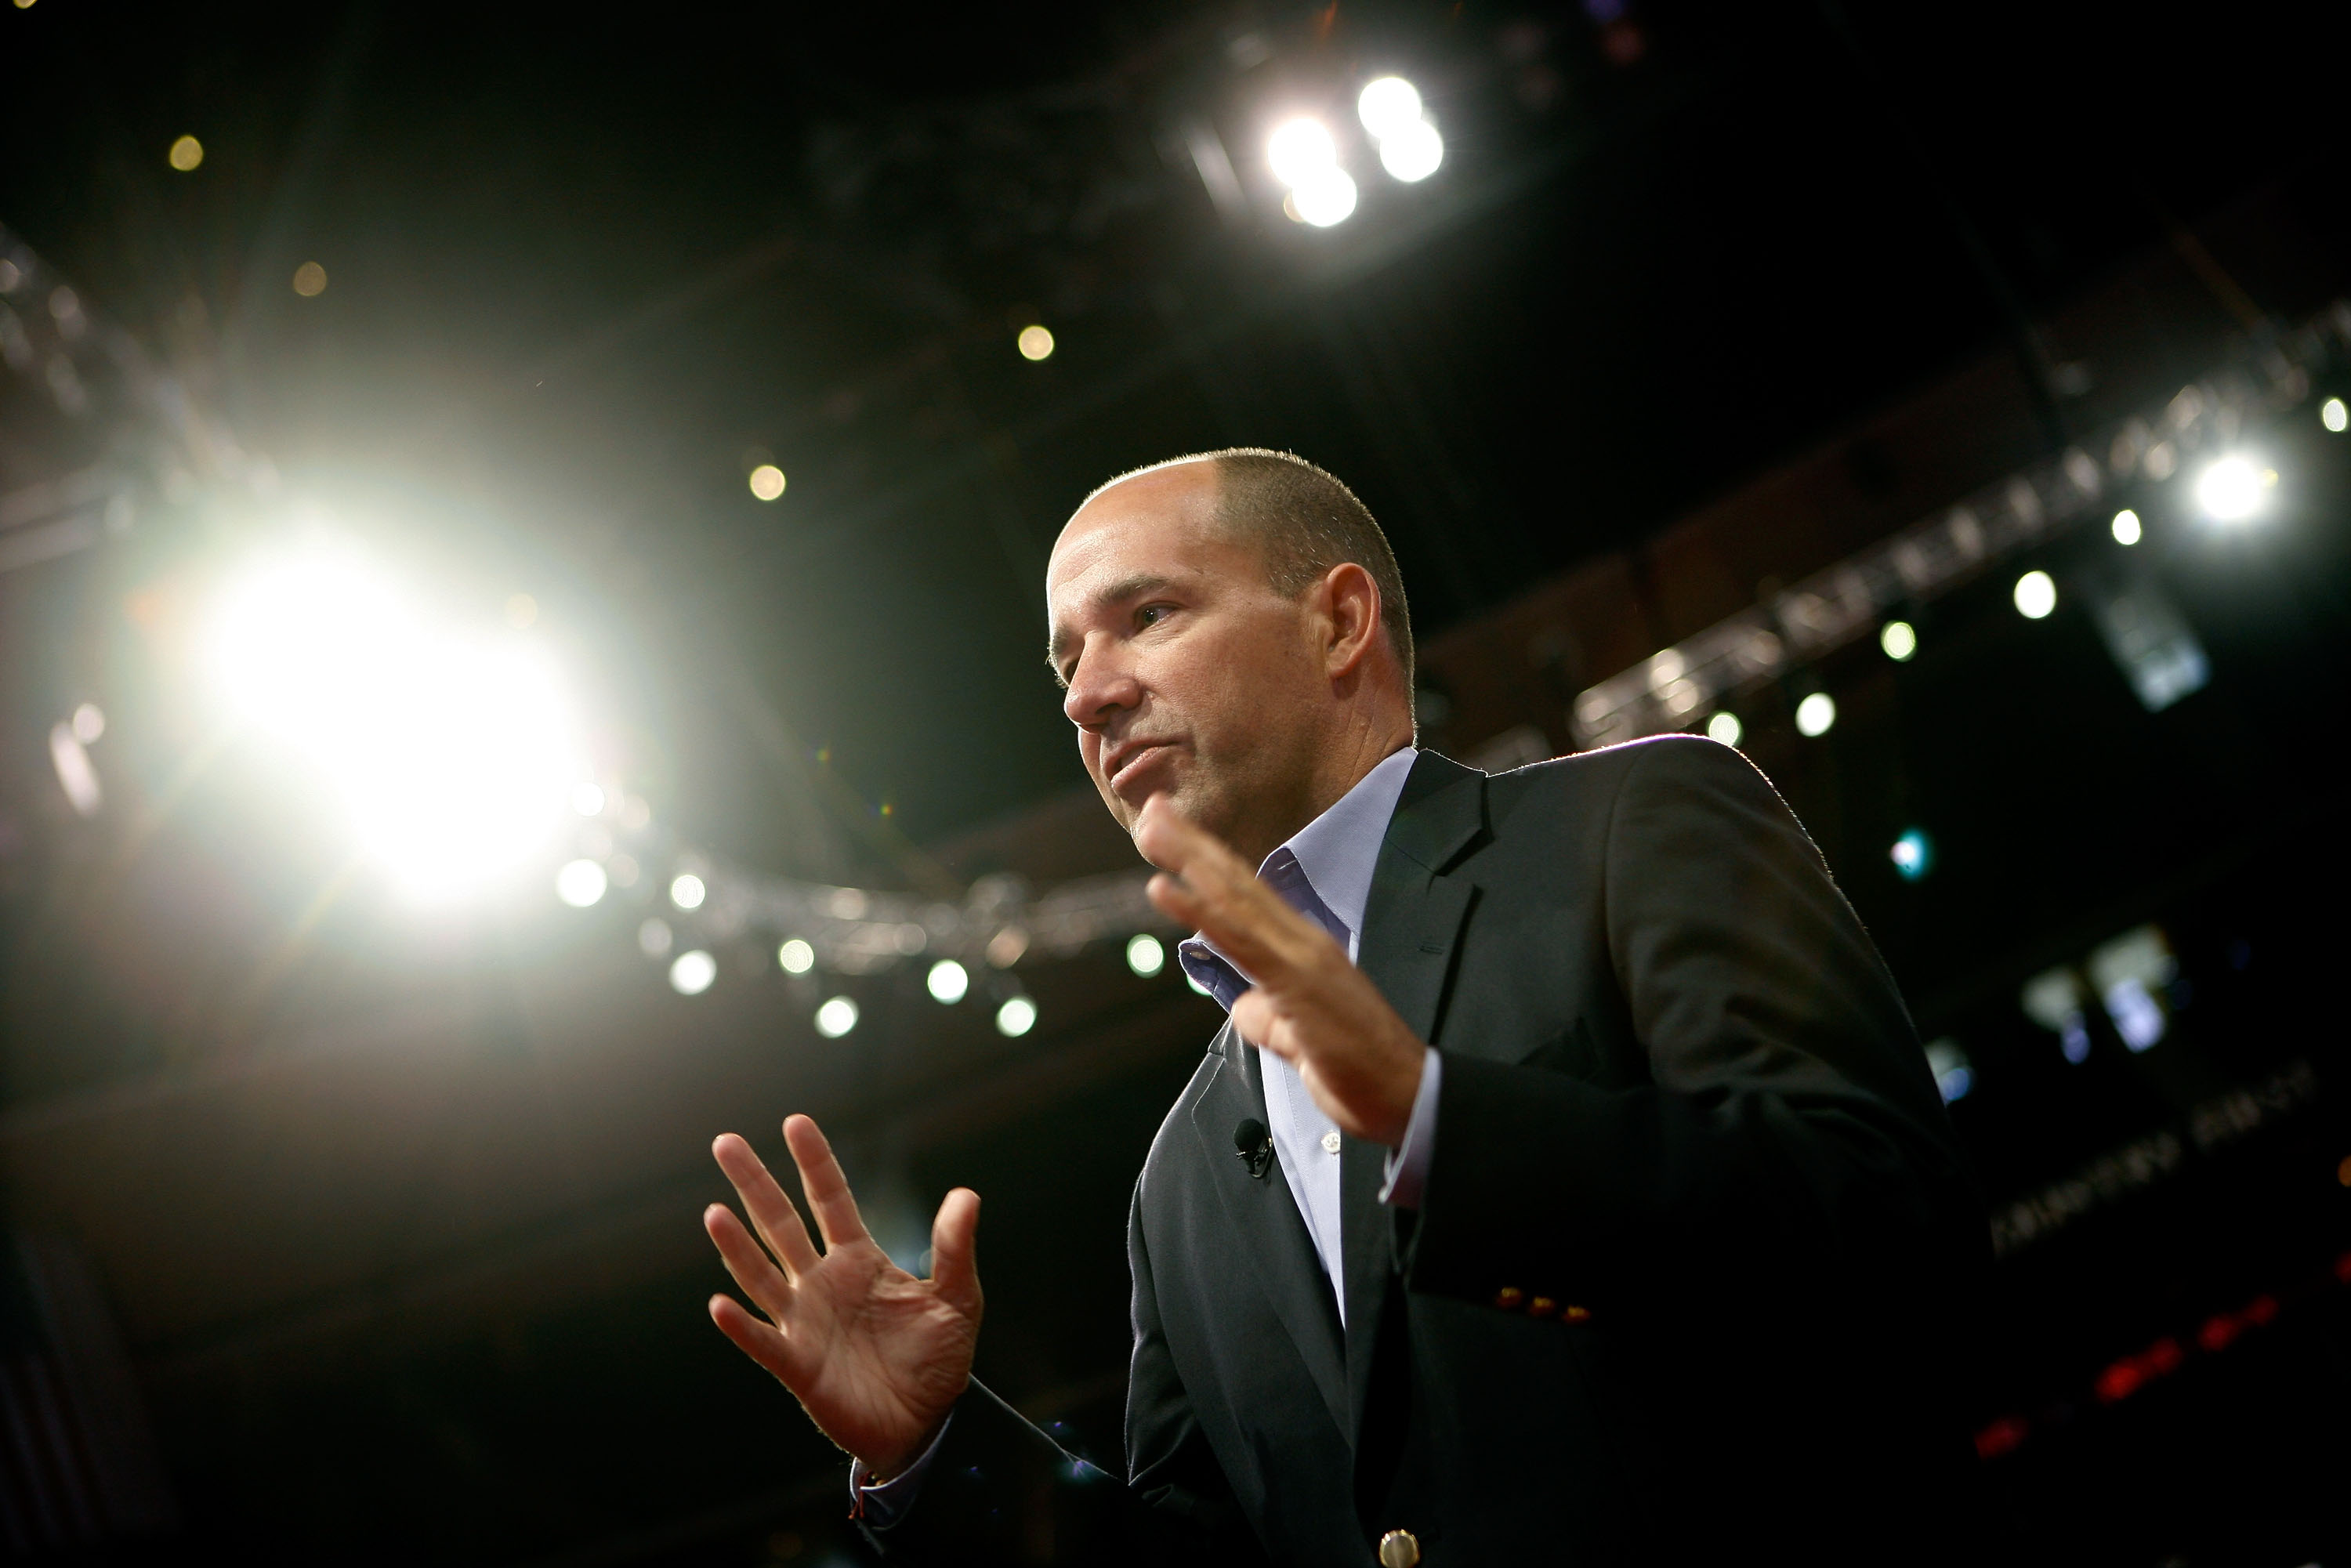 Matthew Dowd speaking at the 2008 Republican National Convention in St. Paul | Source: Getty Images